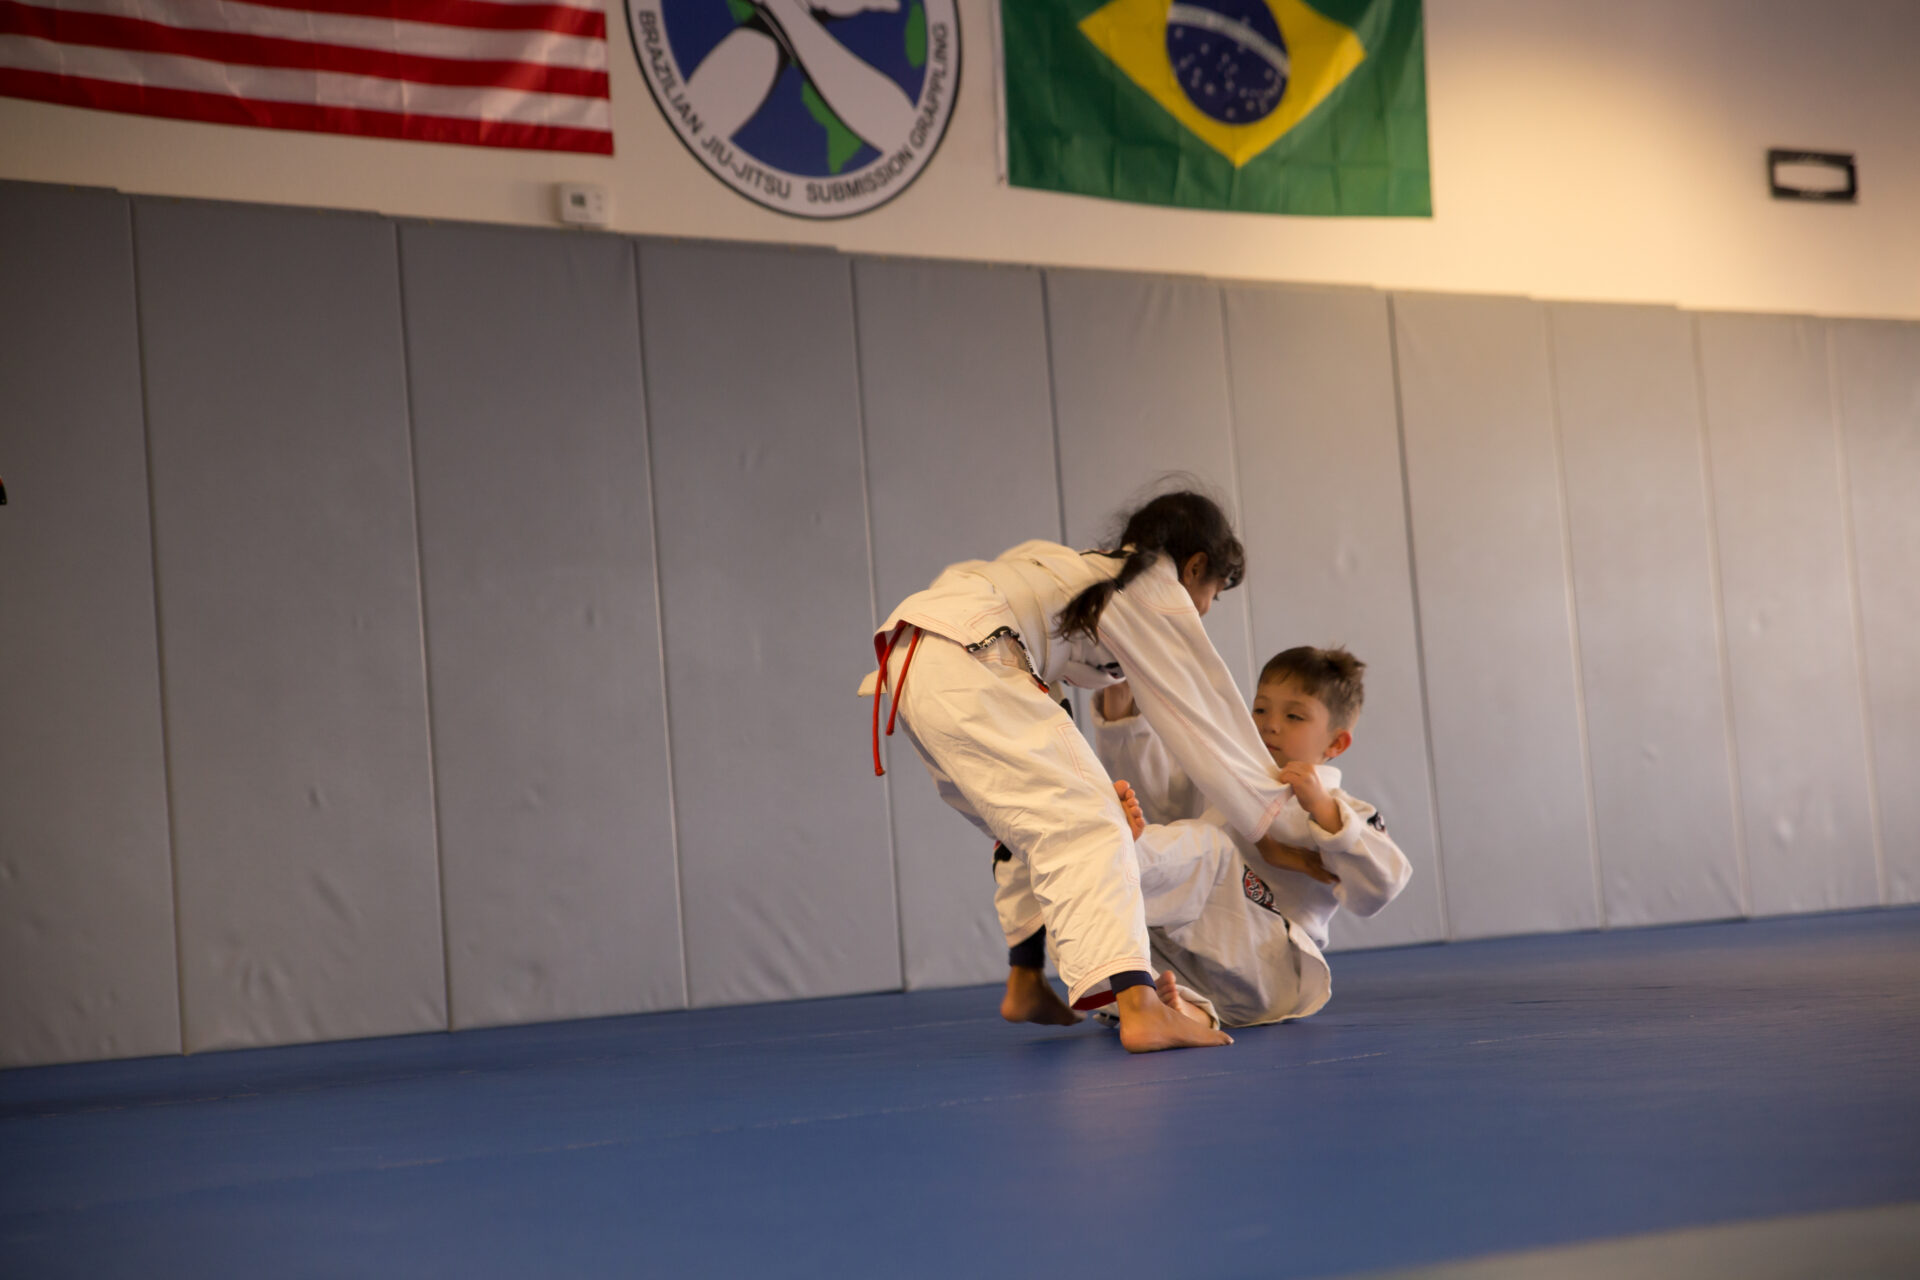 Two people practicing martial arts in a gym.